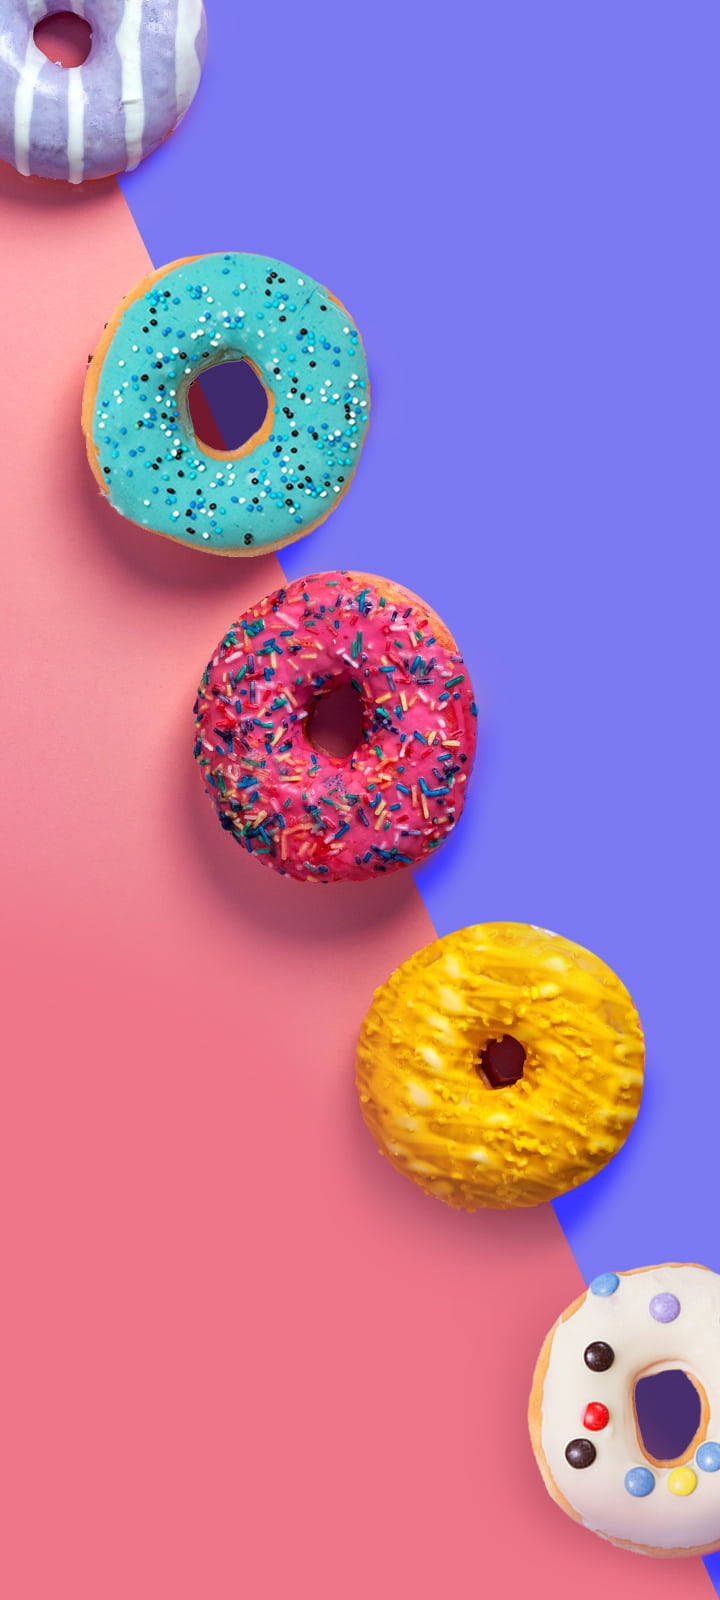 Flavorful Donuts Punch Hole 4K Wallpaper